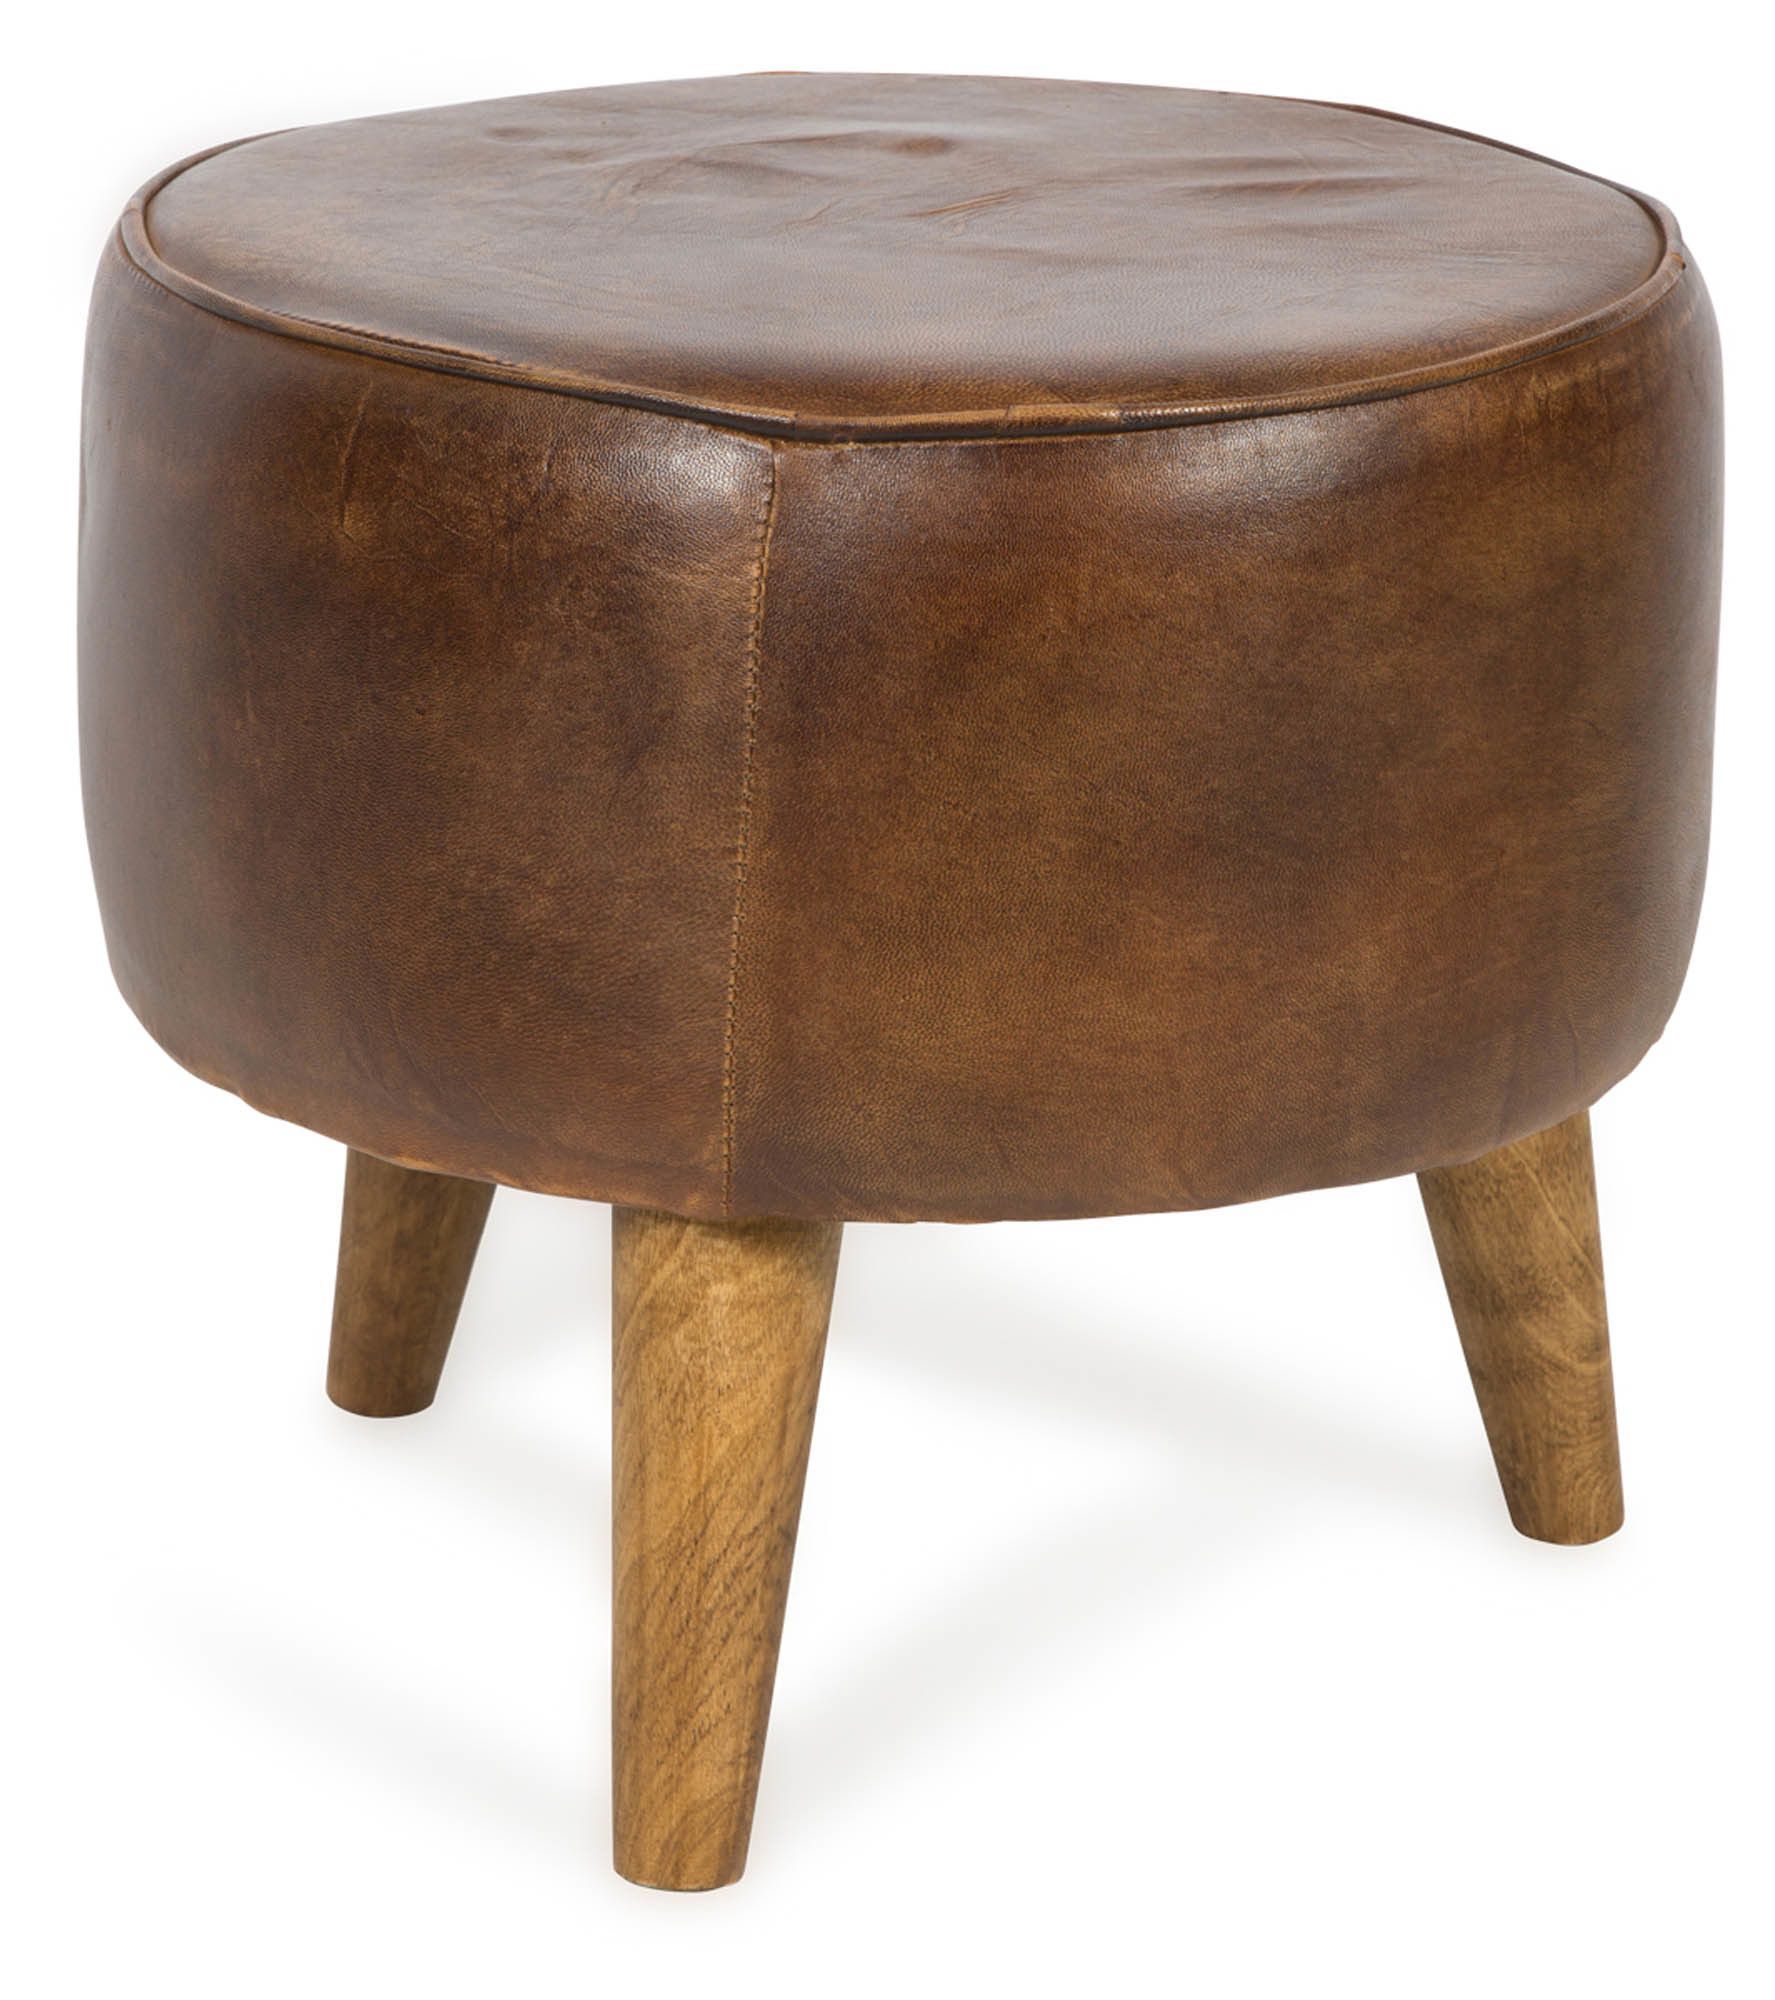 Round Leather Ottoman Stool | Round Leather Ottoman, Leather Ottoman In Brown Leather Hide Round Ottomans (View 19 of 20)